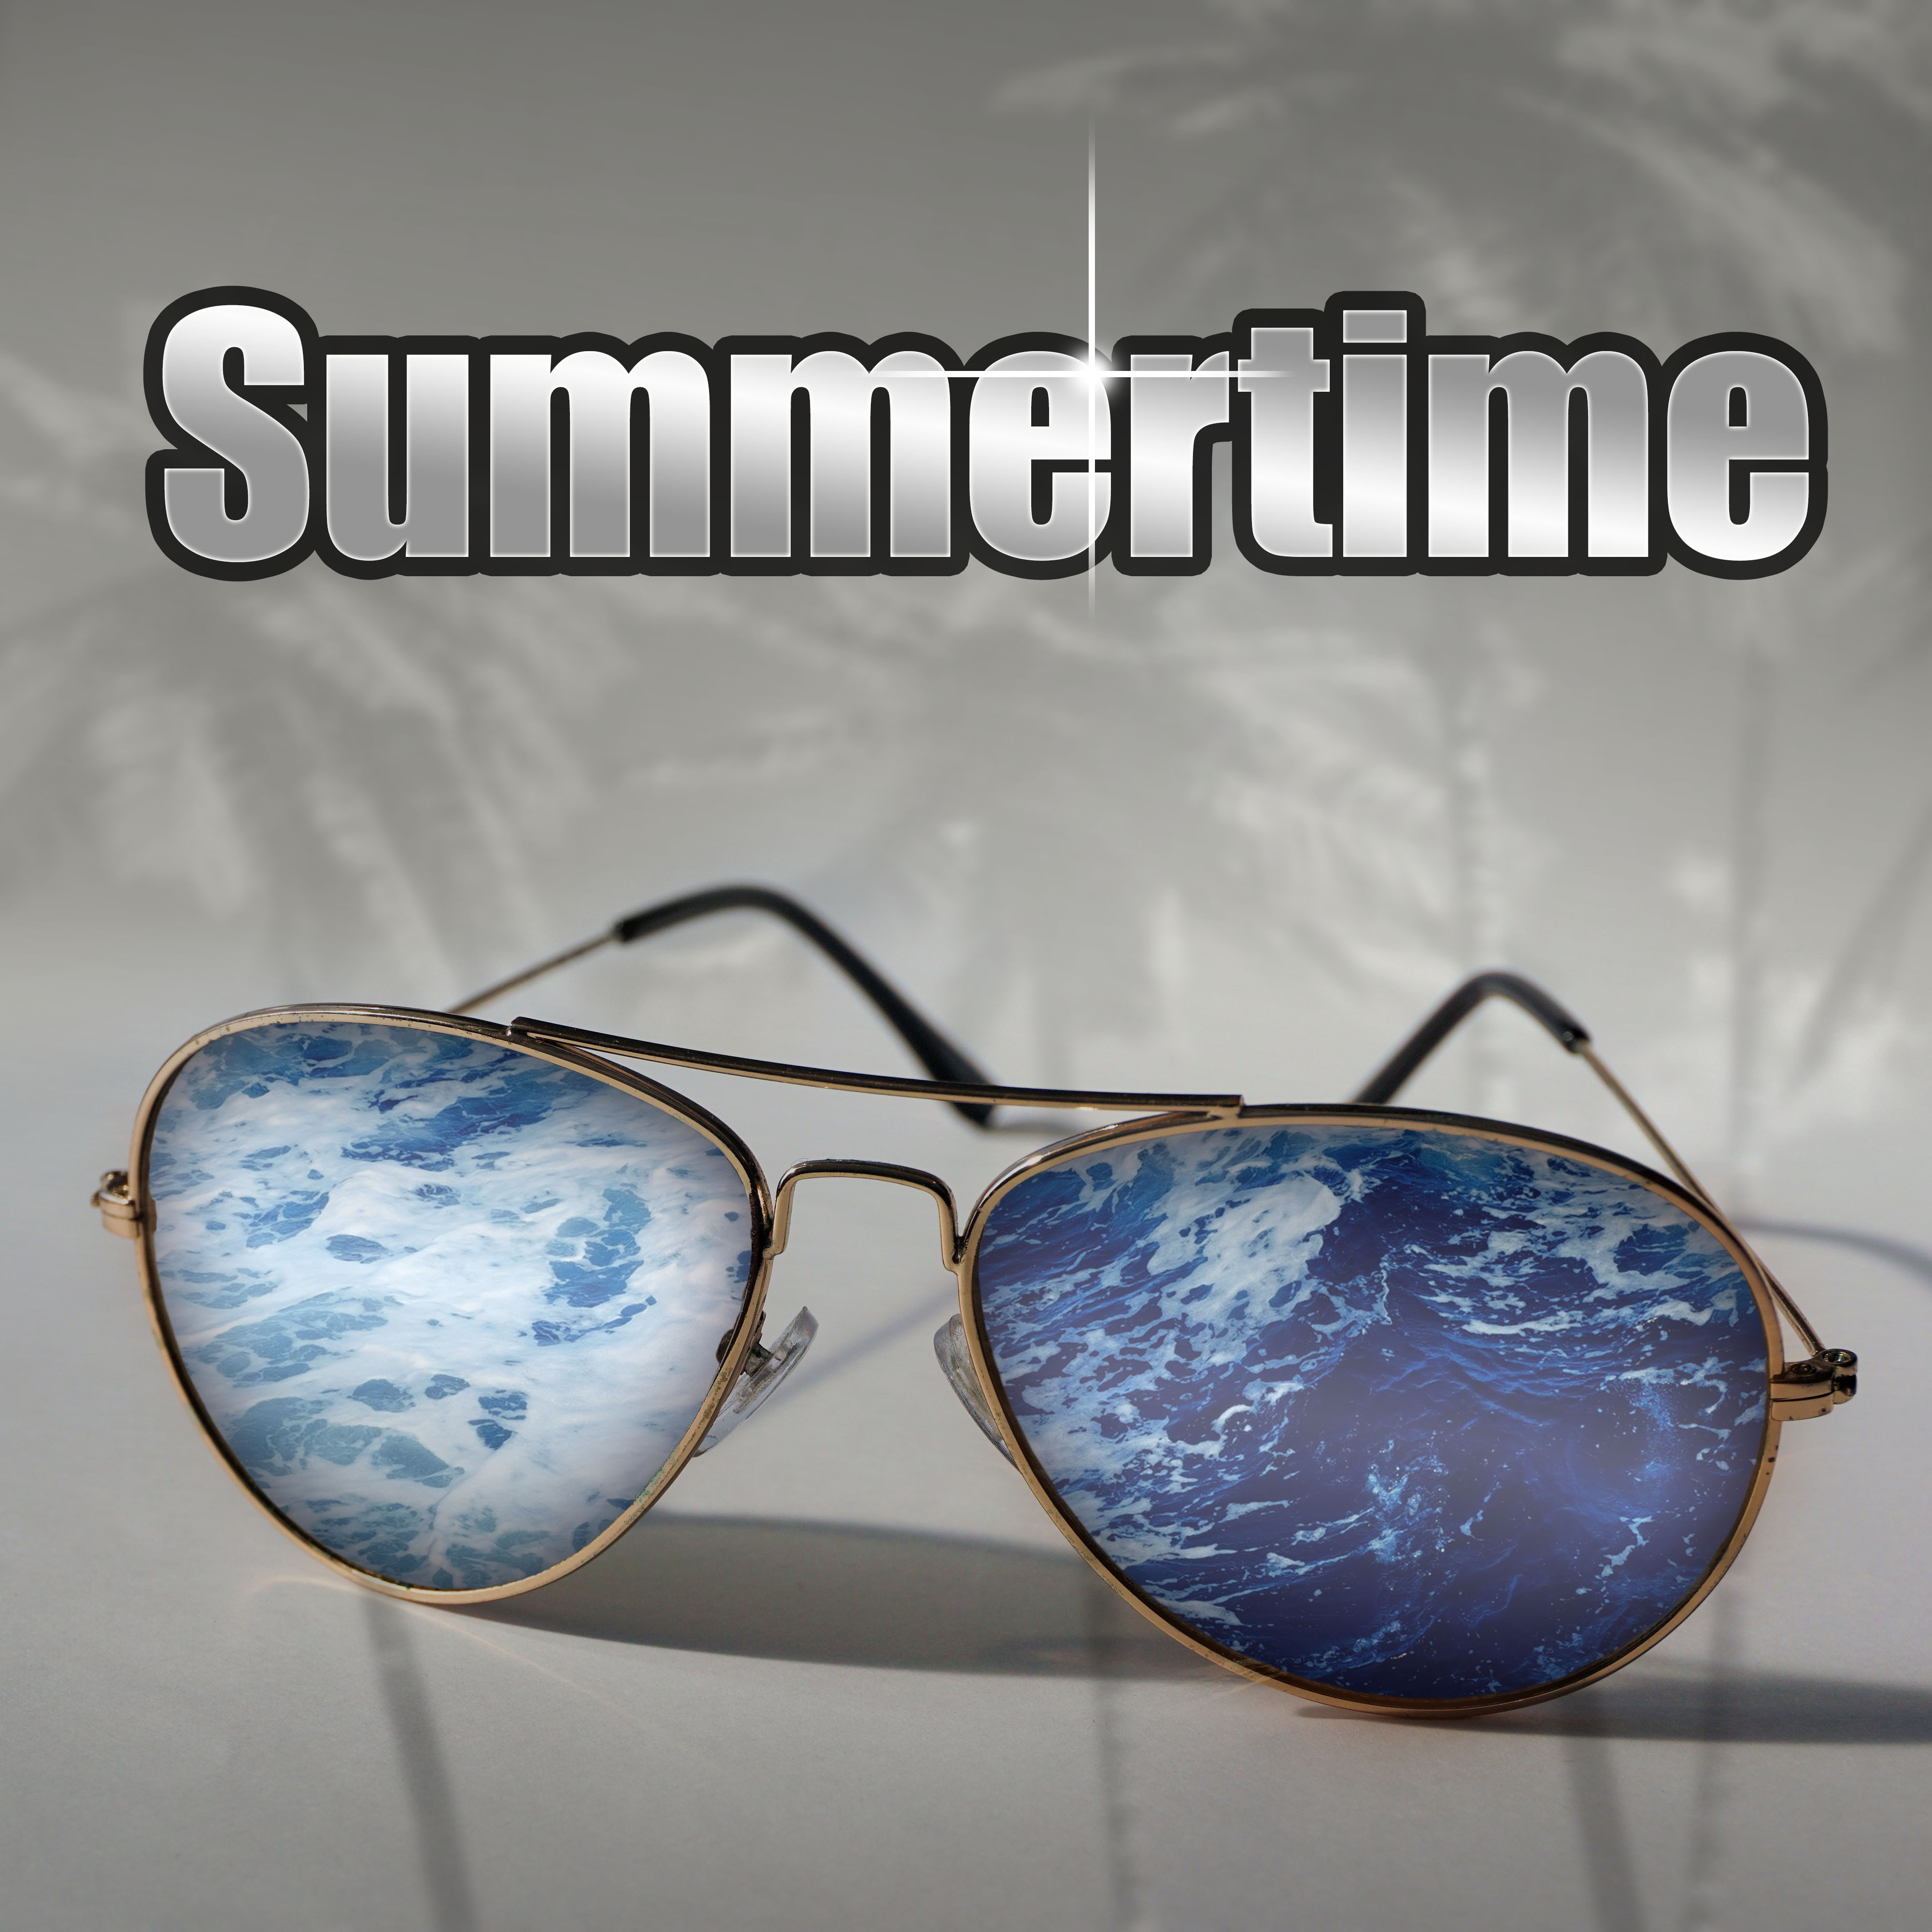 Summertime – Chill Out Music